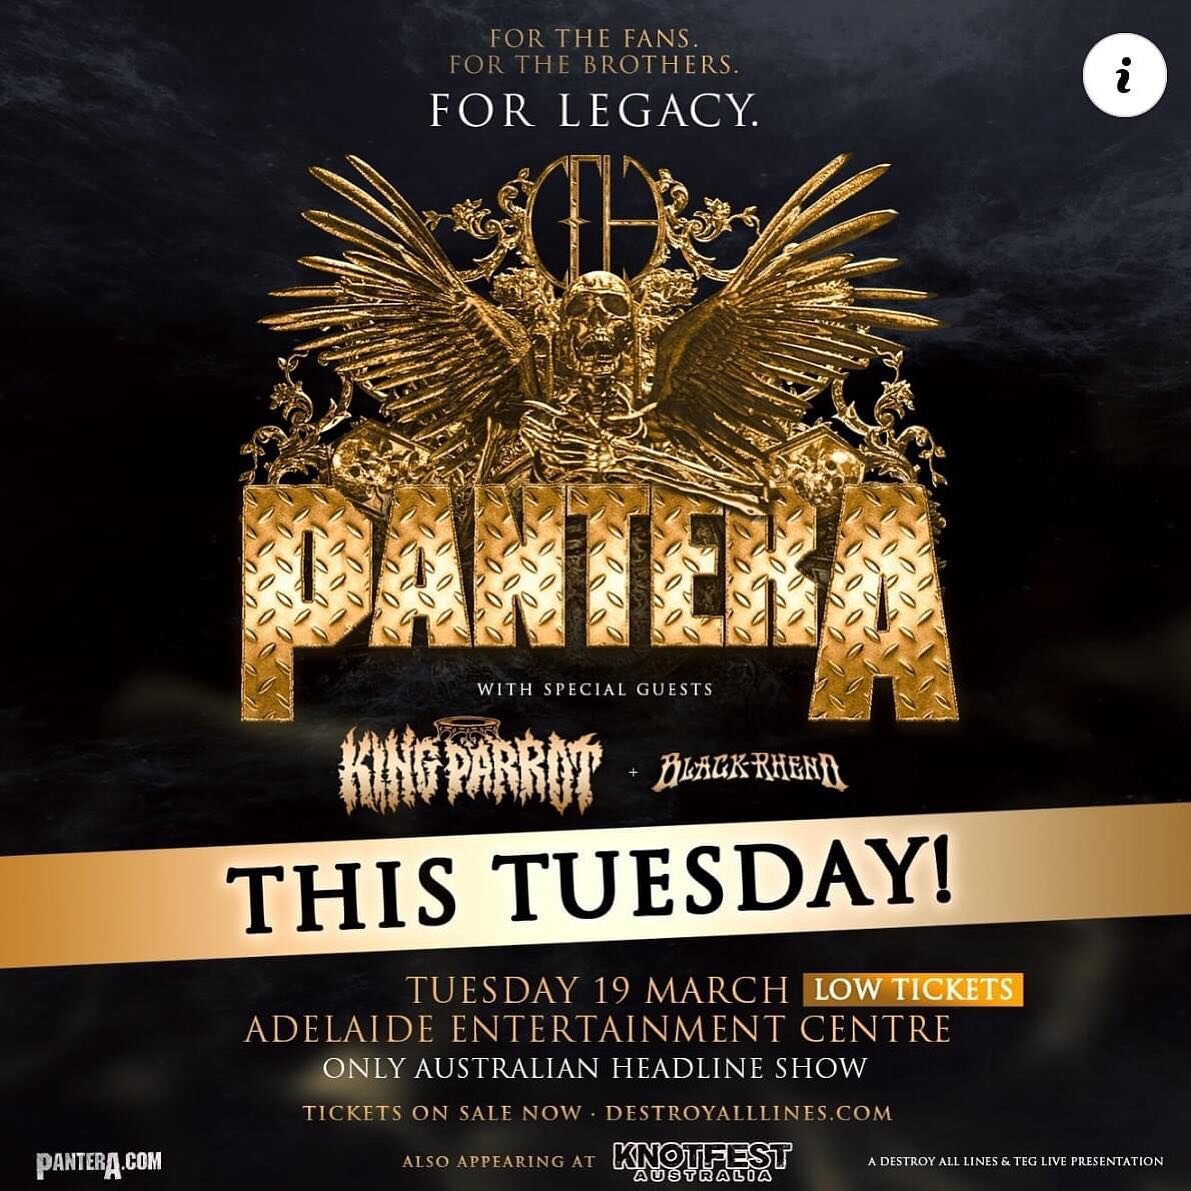 TOMORROW NIGHT WILL BE A STONKER!!!
@panteraofficial - @kingparrotband - @blackrheno 
It&rsquo;s hard to grasp this is actually a reality&hellip; let&rsquo;s do this 👊